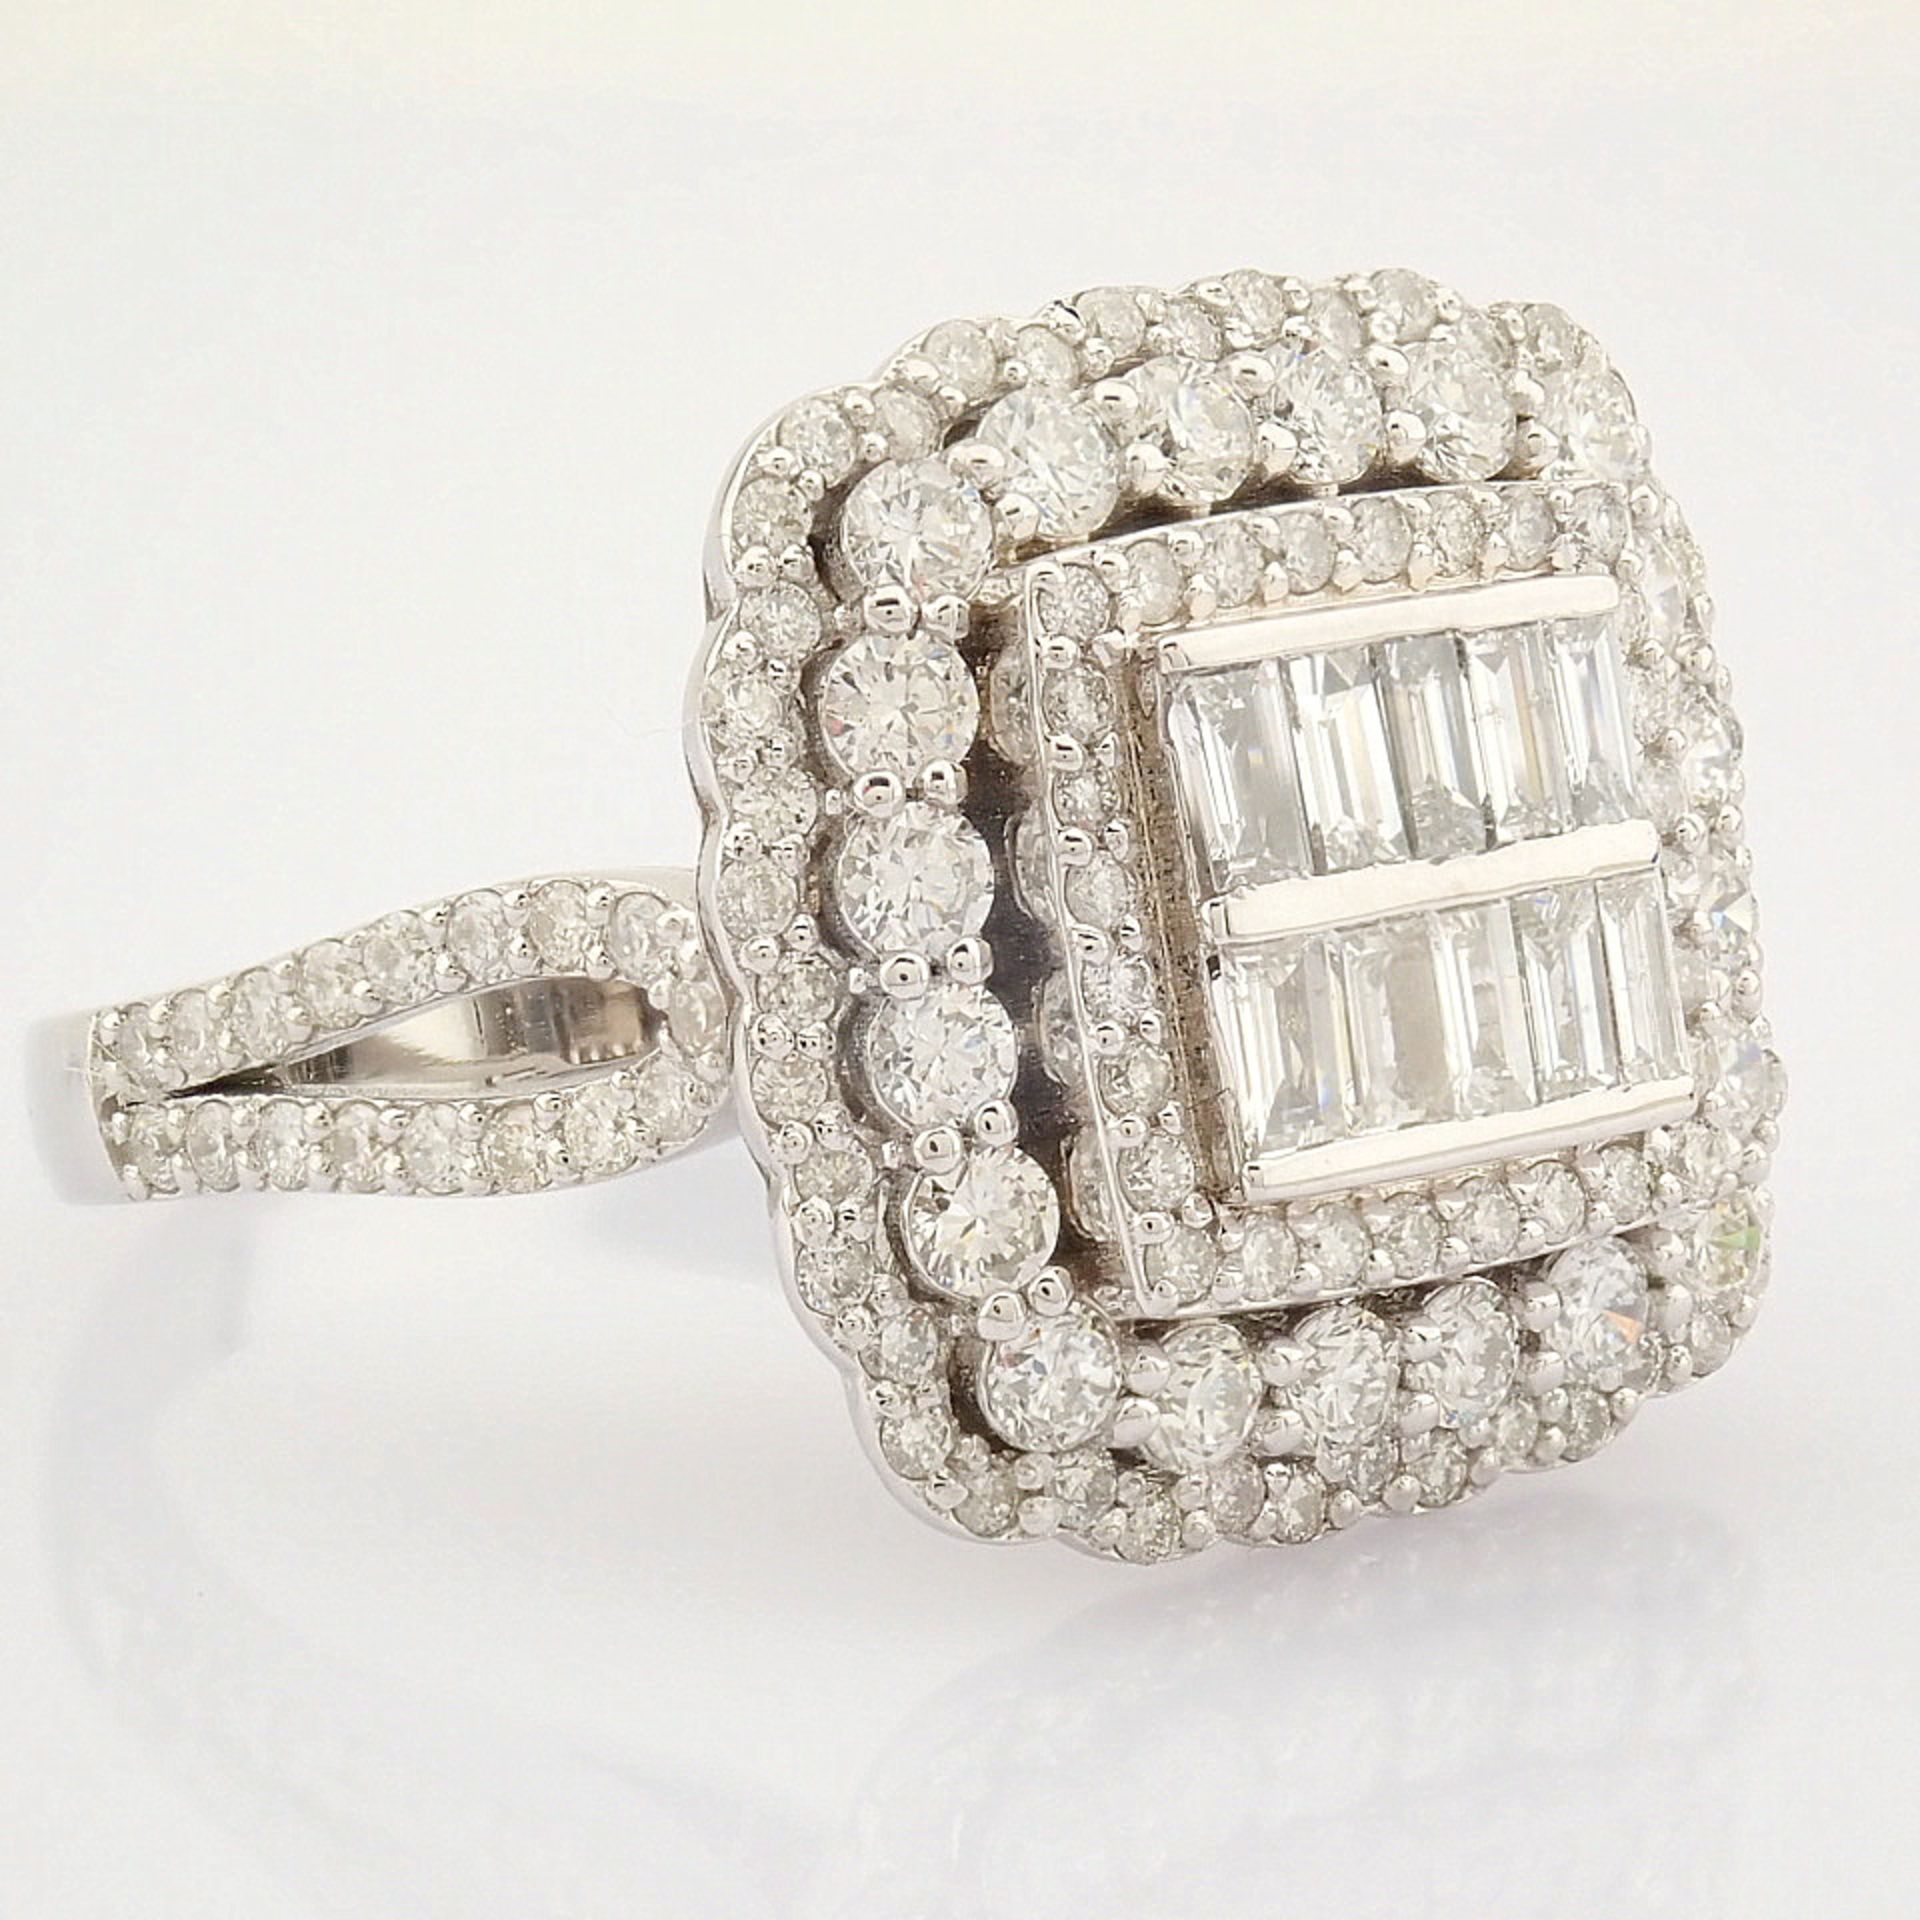 Certificated 14K White Gold Baguette Diamond & Diamond Ring (Total 1.6 ct Stone) - Image 5 of 6